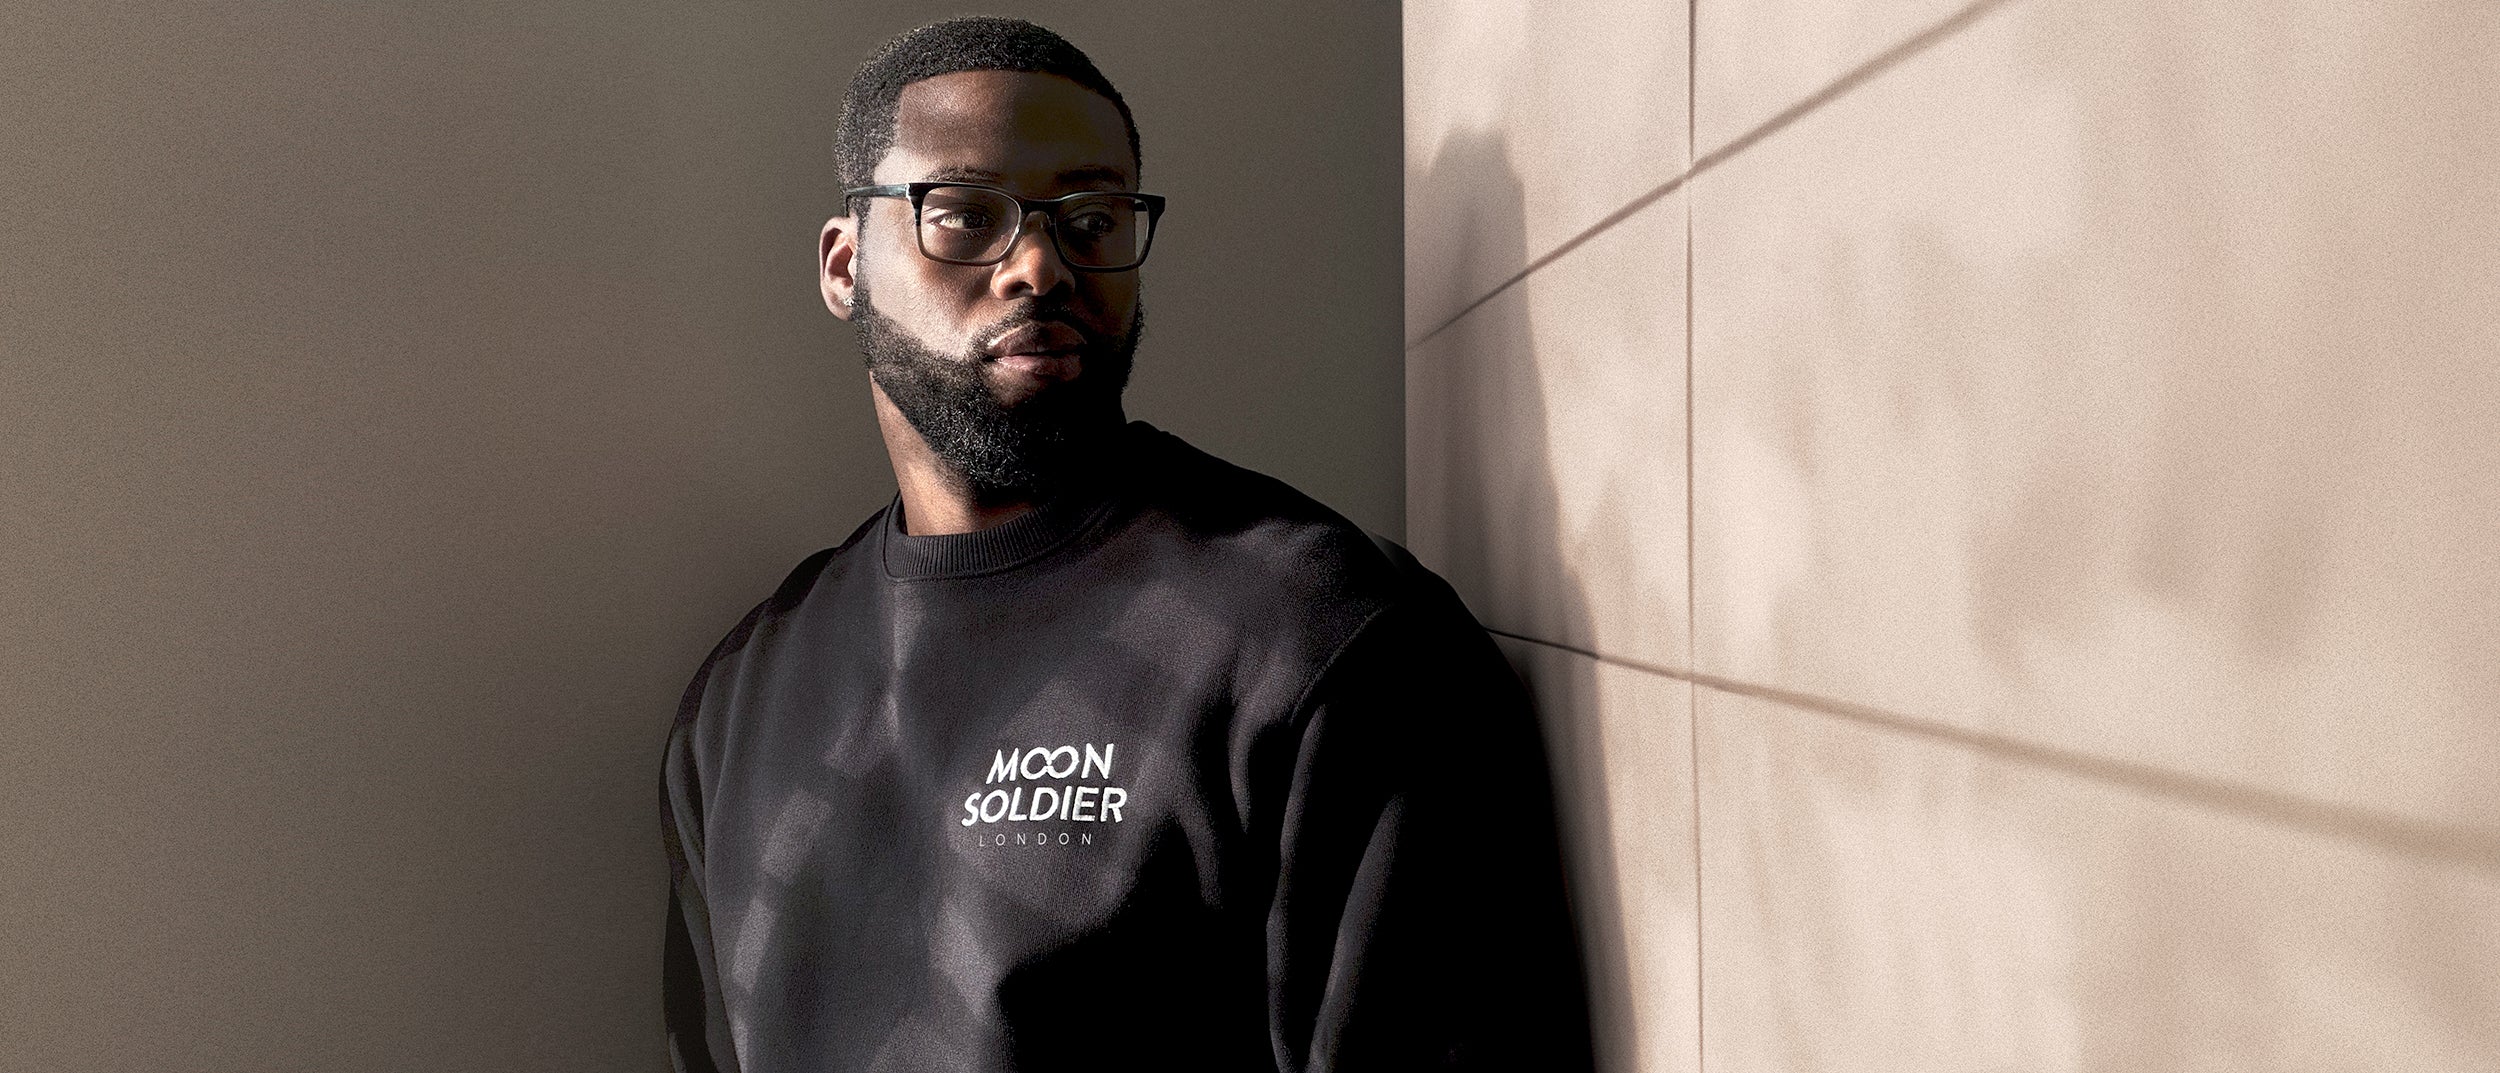 Header image featuring a young African American male wearing glasses and a black Moon Soldier sweatshirt, adorned with the Moon Soldier London logo on the left chest. He's positioned against a room corner, with one wall in warm grey and the other in muted soft pink panelling.